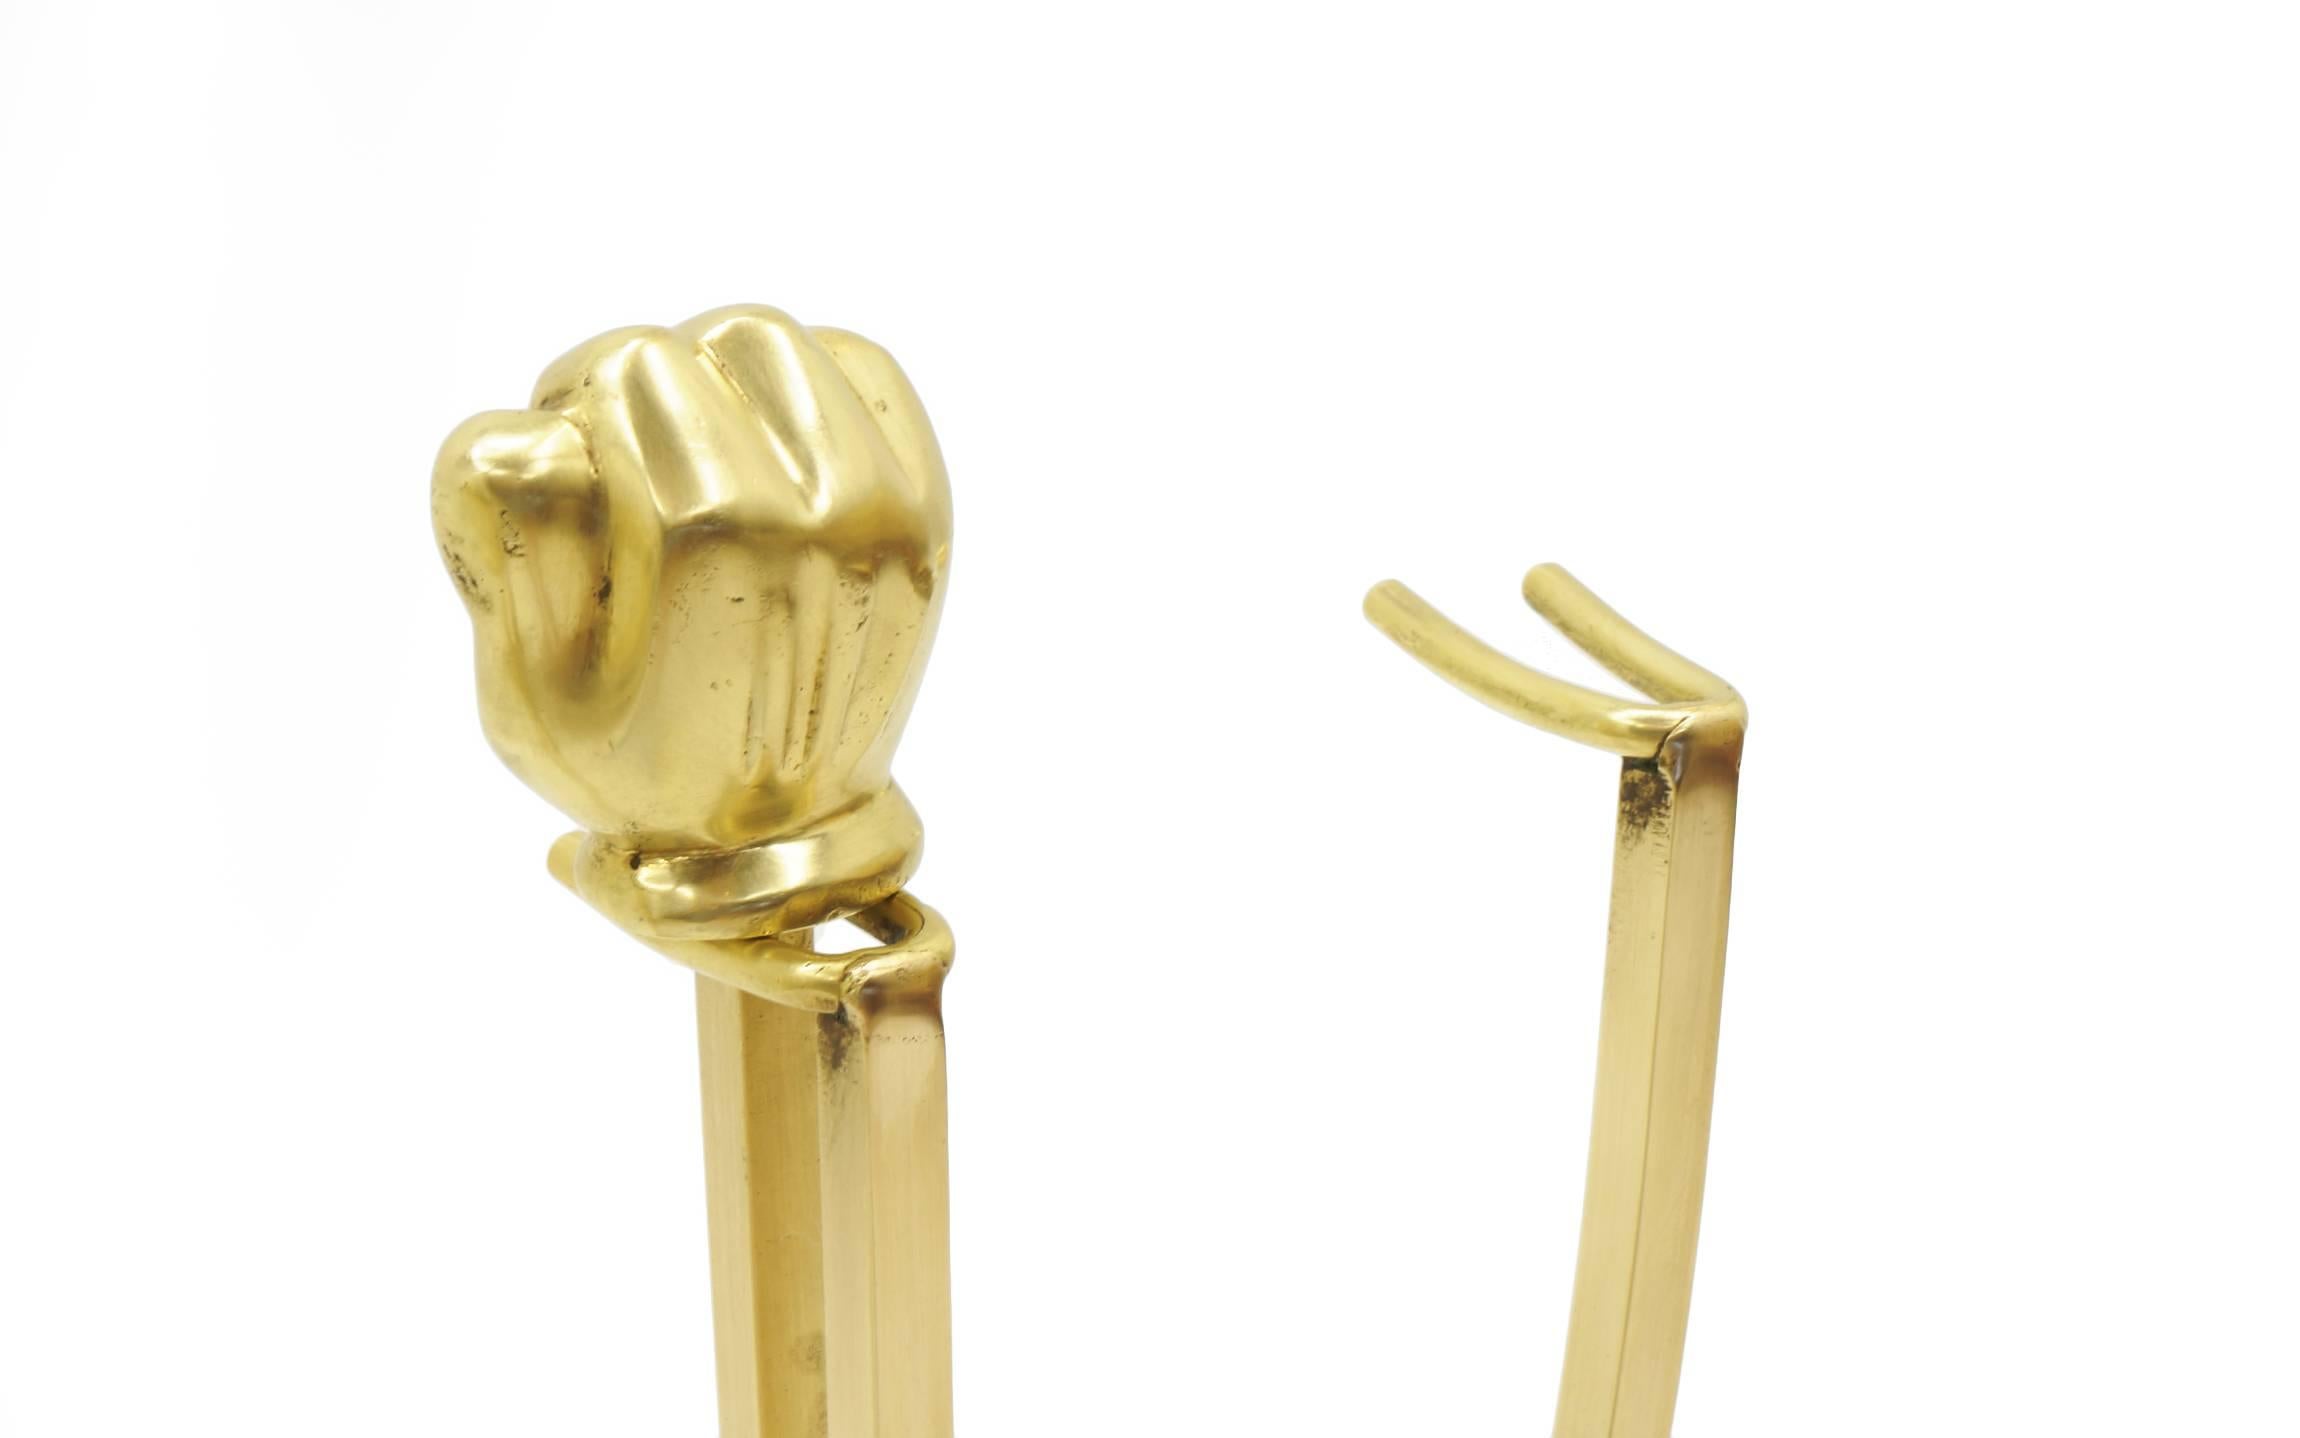 Solid Brass Fireplace Tools with Four Fingered Fists as Handles 1